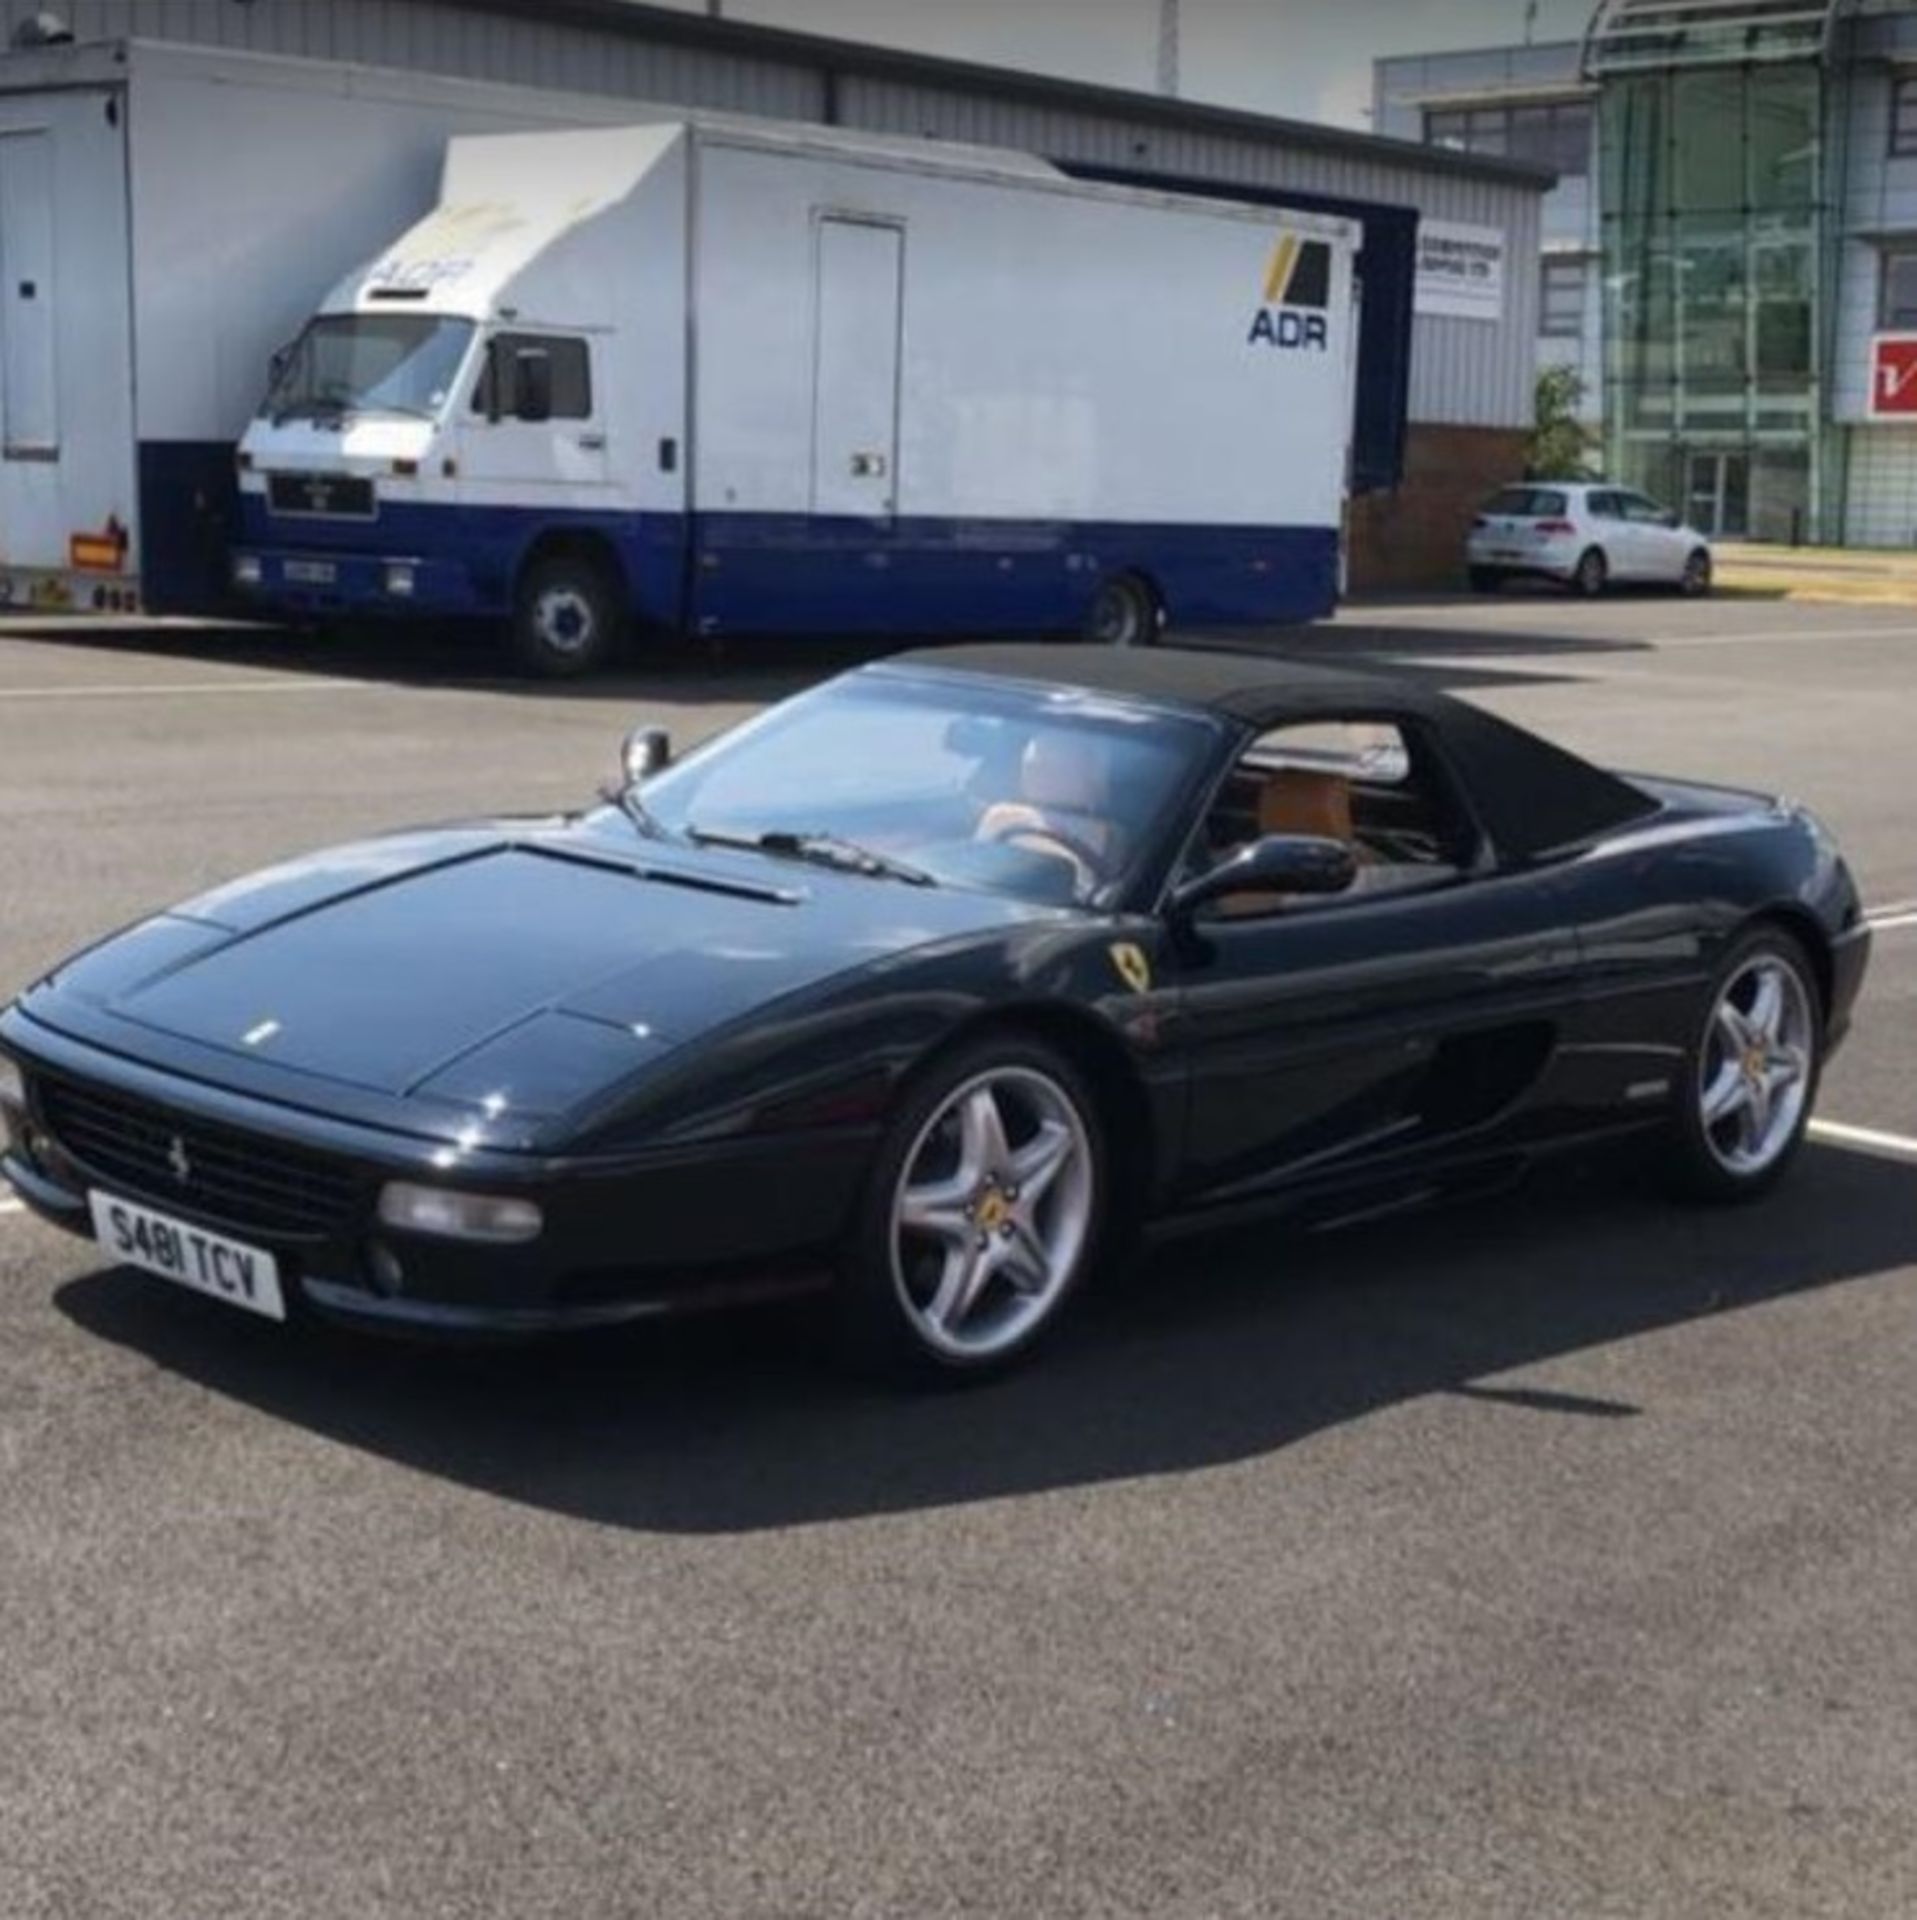 IMMACULATE 1999 FERRARI 355 F1 SPIDER WITH GENUINE LOW MILEAGE & FULL COMPREHENSIVE SERVICE HISTORY - Image 5 of 10